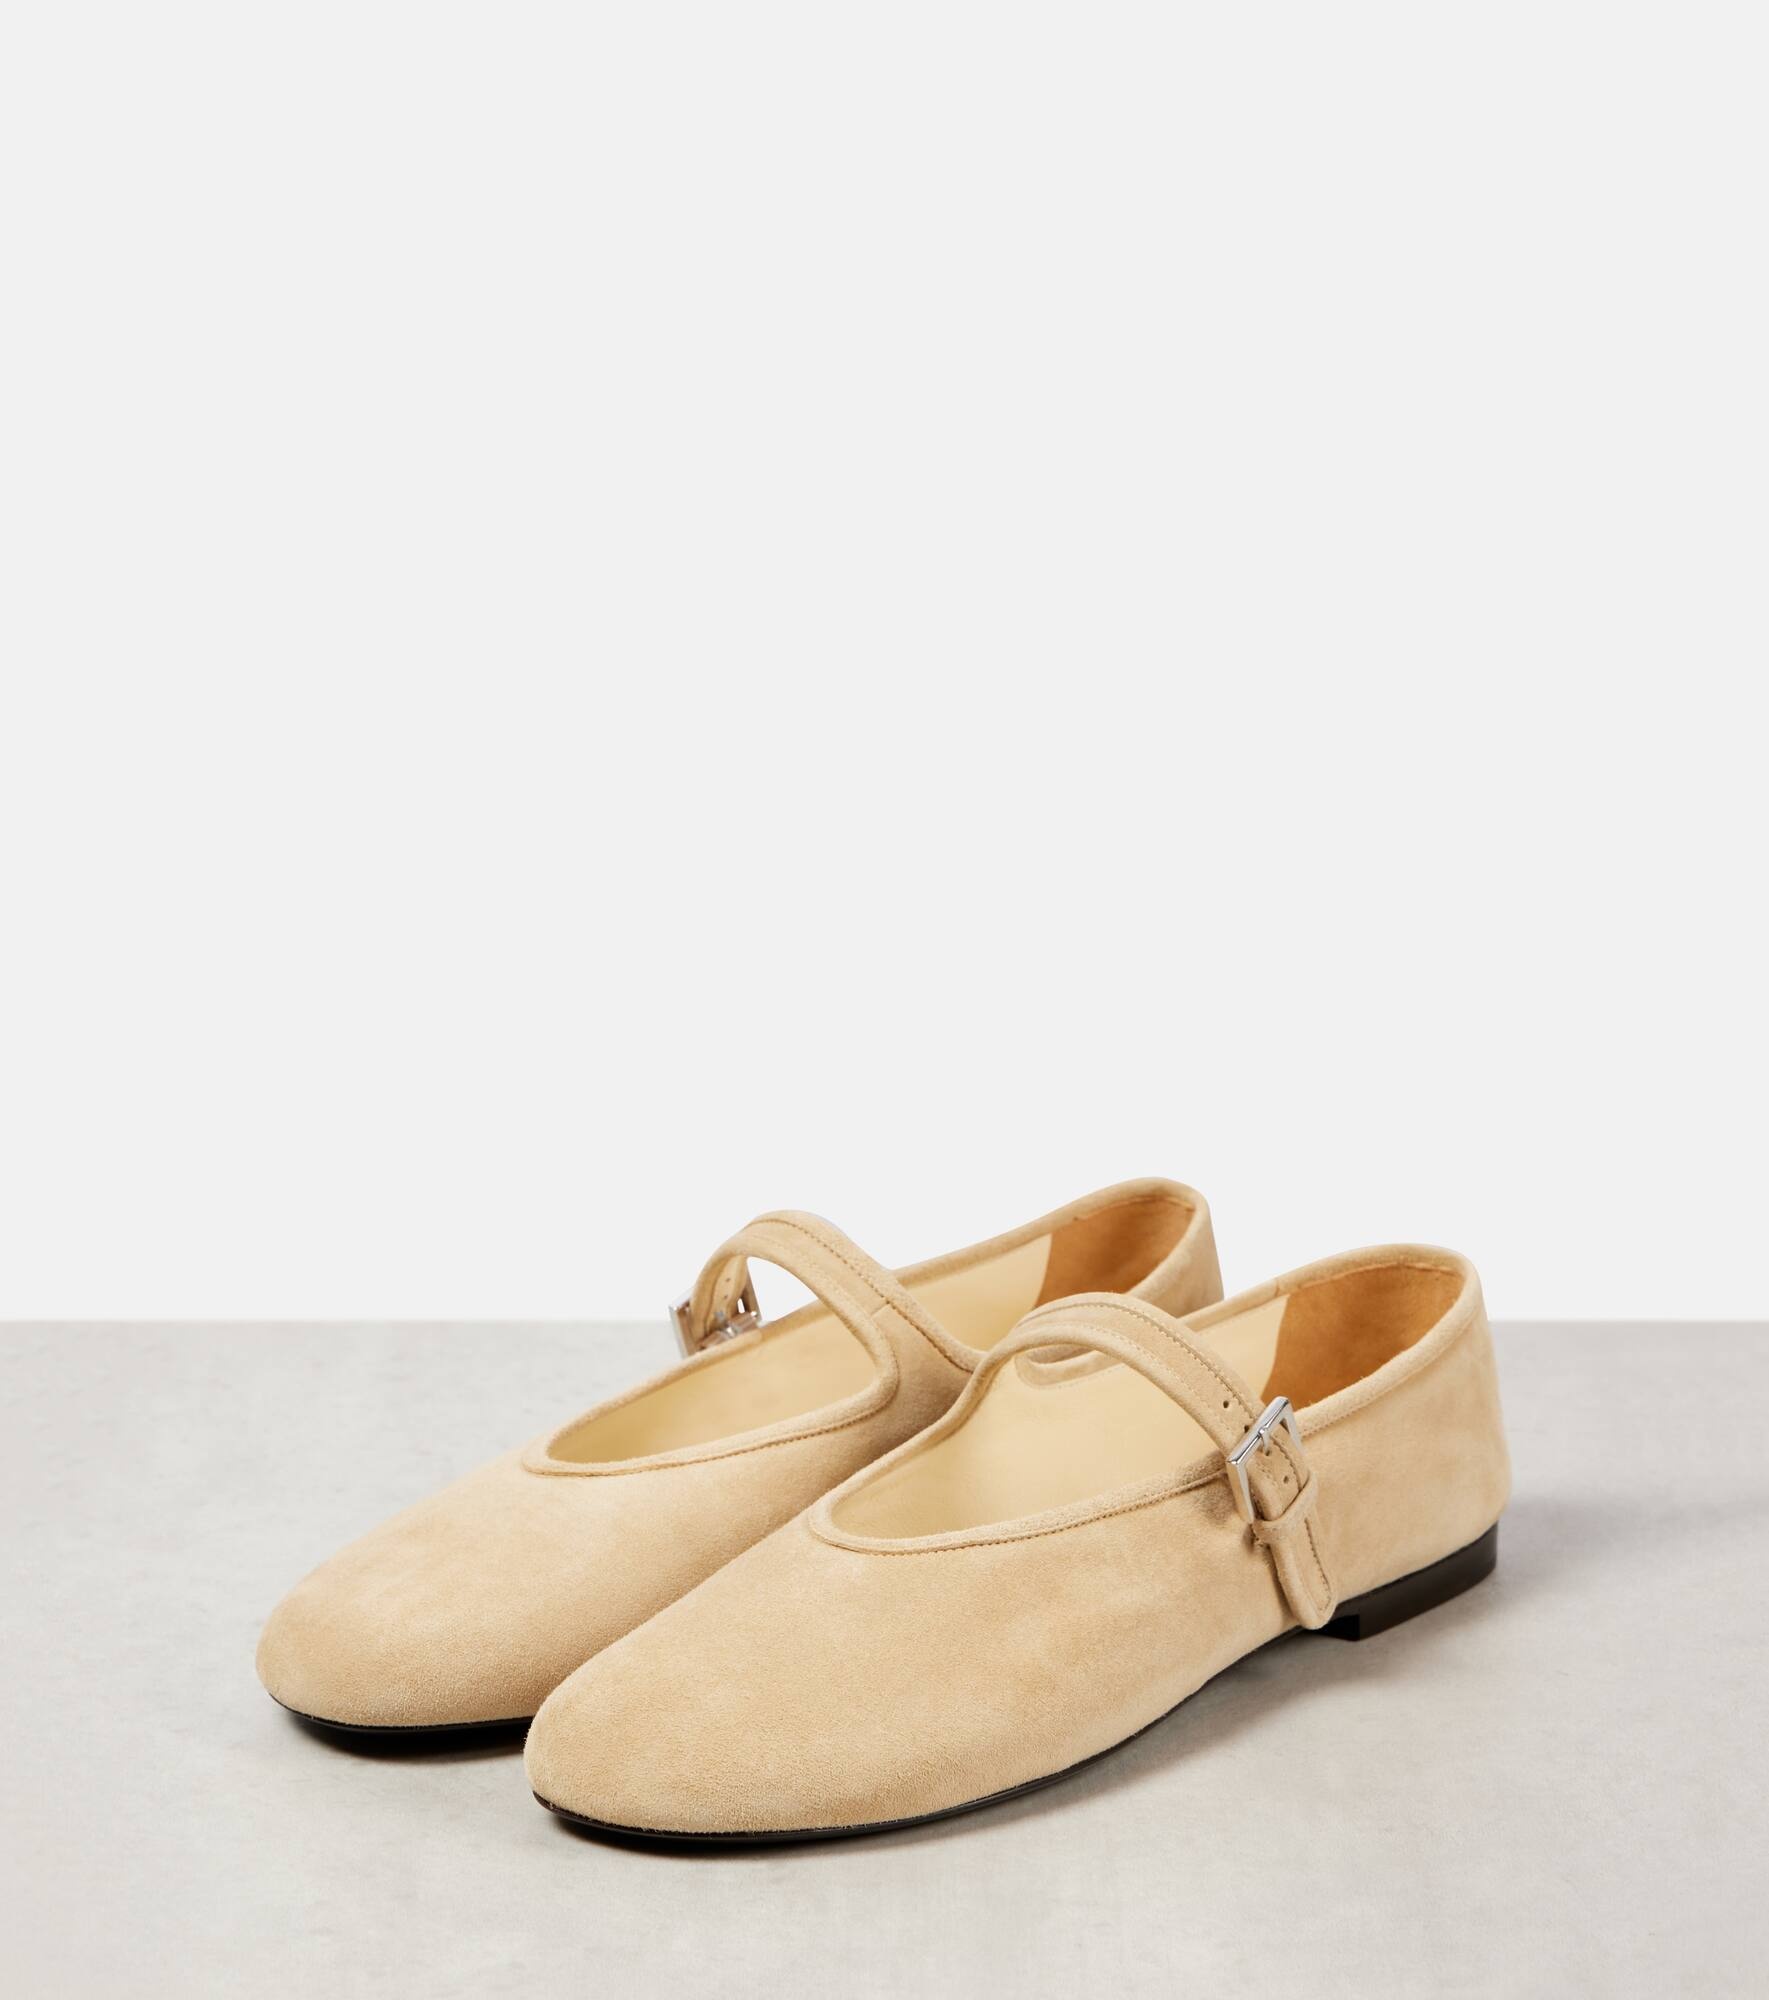 Suede Mary Jane flats - 3